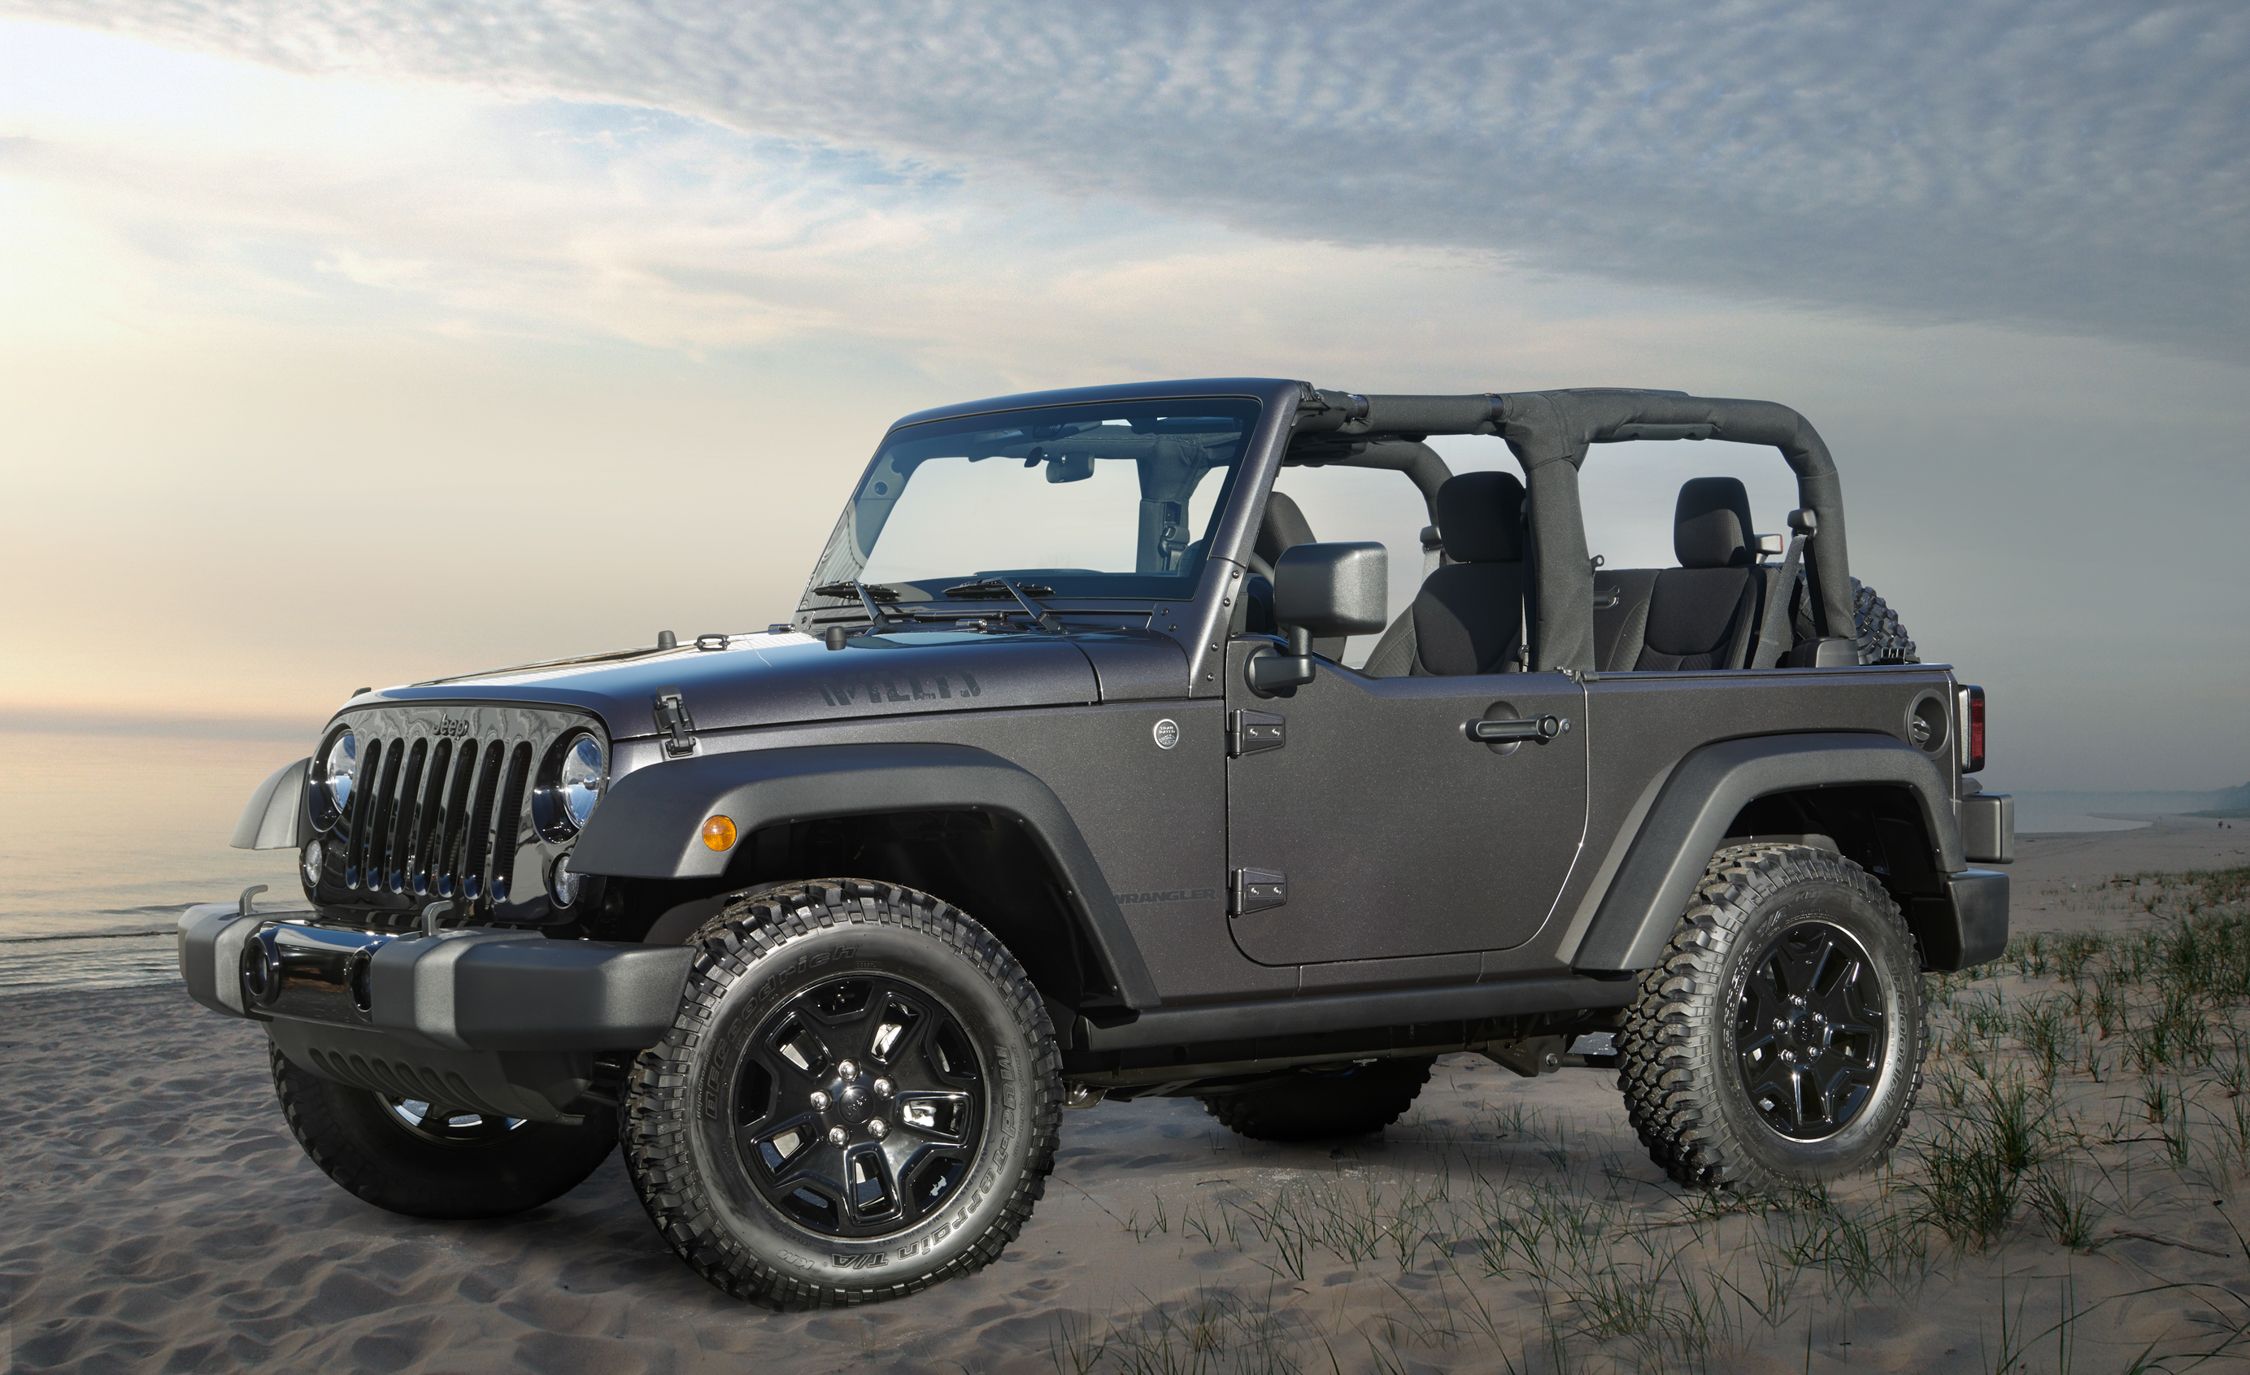 2015 Jeep Wrangler 2-door Pictures | Photo Gallery | Car and Driver